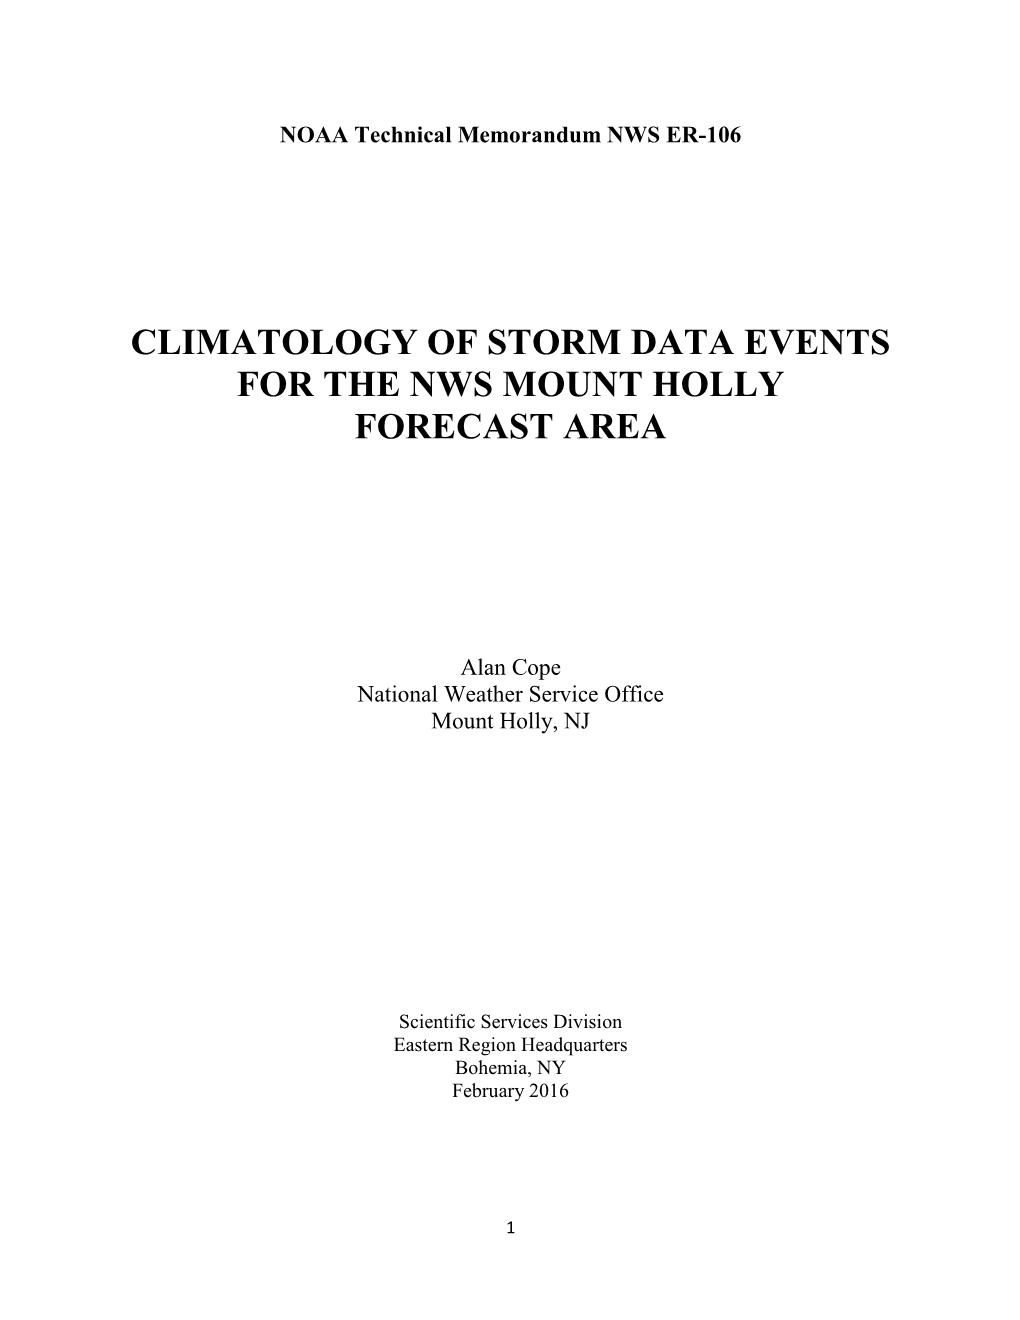 Climatology of Storm Data Events for the Nws Mount Holly Forecast Area